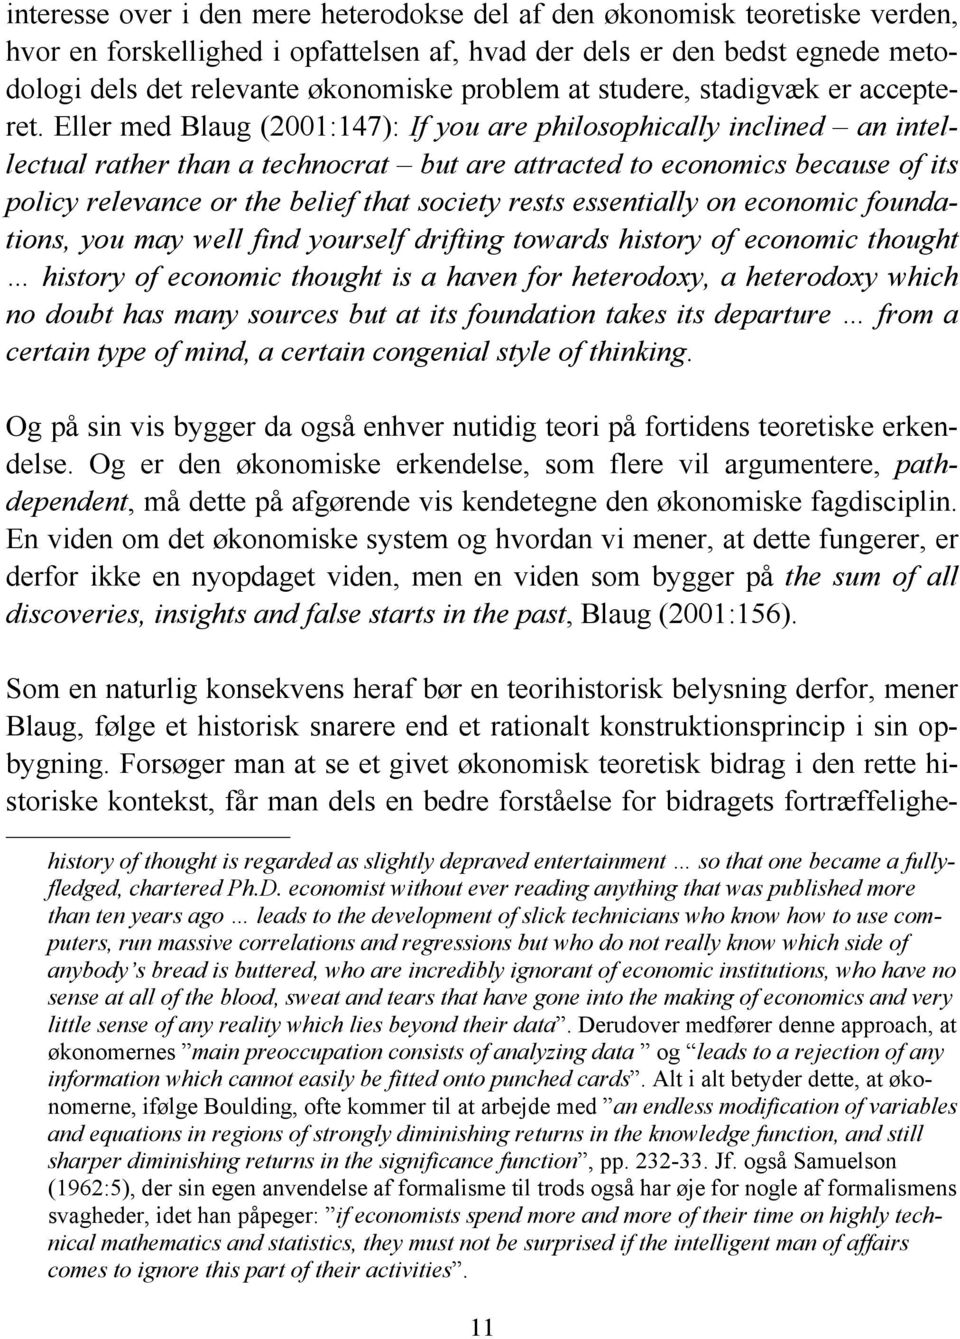 Eller med Blaug (2001:147): If you are philosophically inclined an intellectual rather than a technocrat but are attracted to economics because of its policy relevance or the belief that society